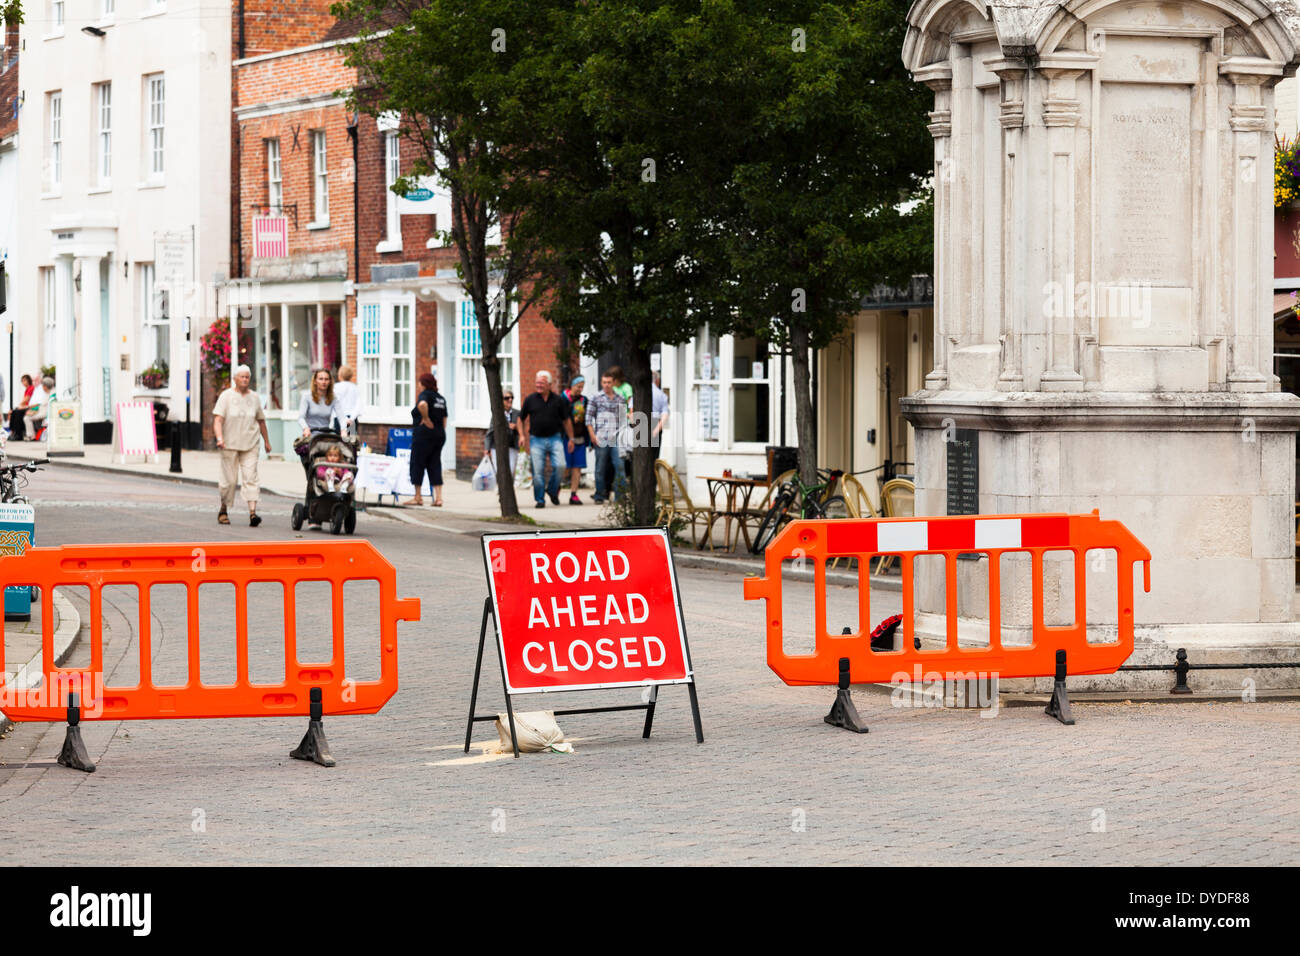 Road closed sign and barriers in town high street. Stock Photo